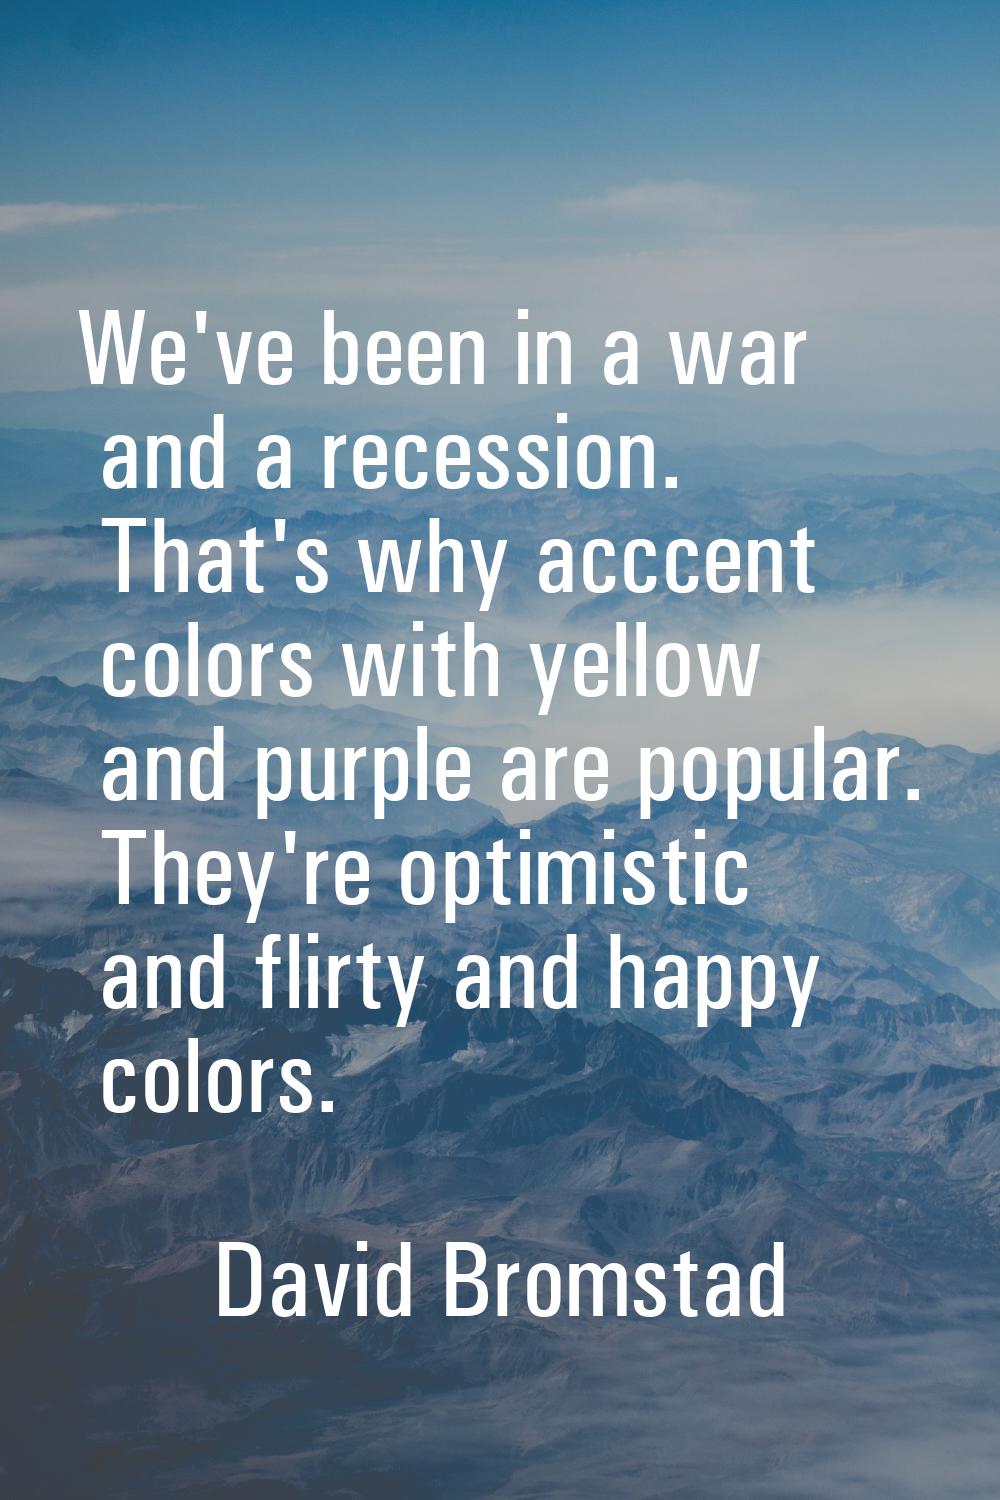 We've been in a war and a recession. That's why acccent colors with yellow and purple are popular. 